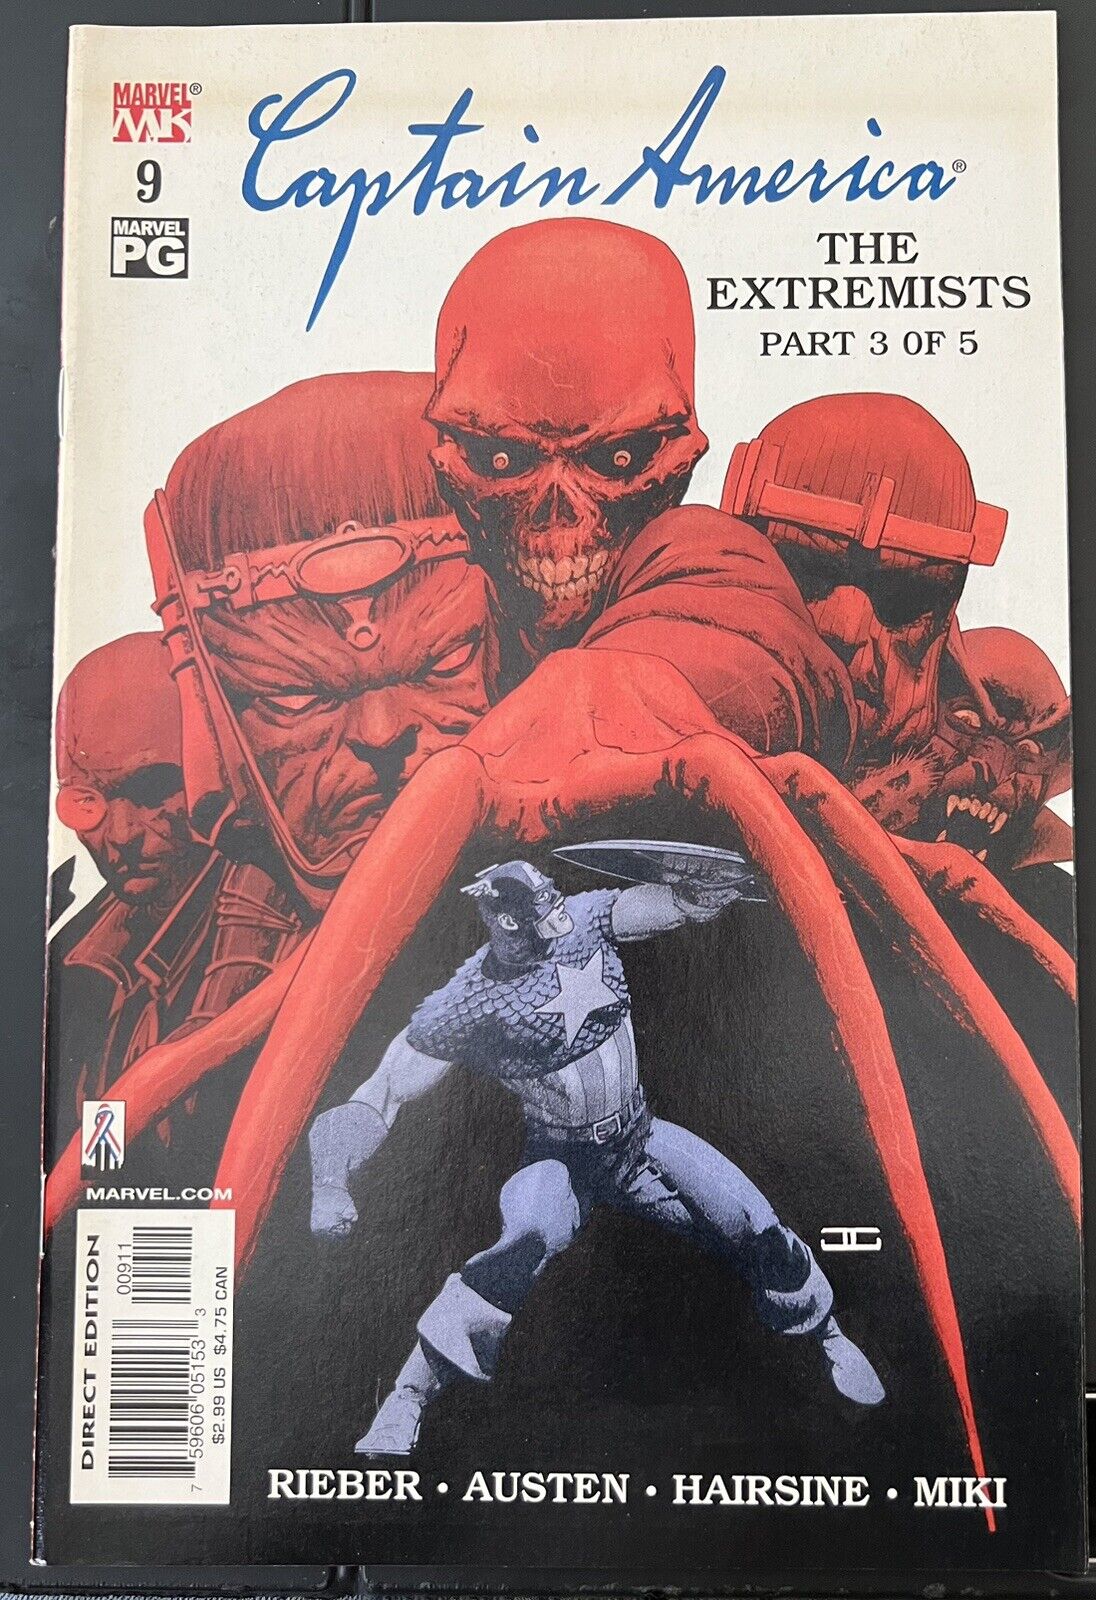 Captain America Vol 4 #9 - The Extremists Part 3 of 5 - April 2003